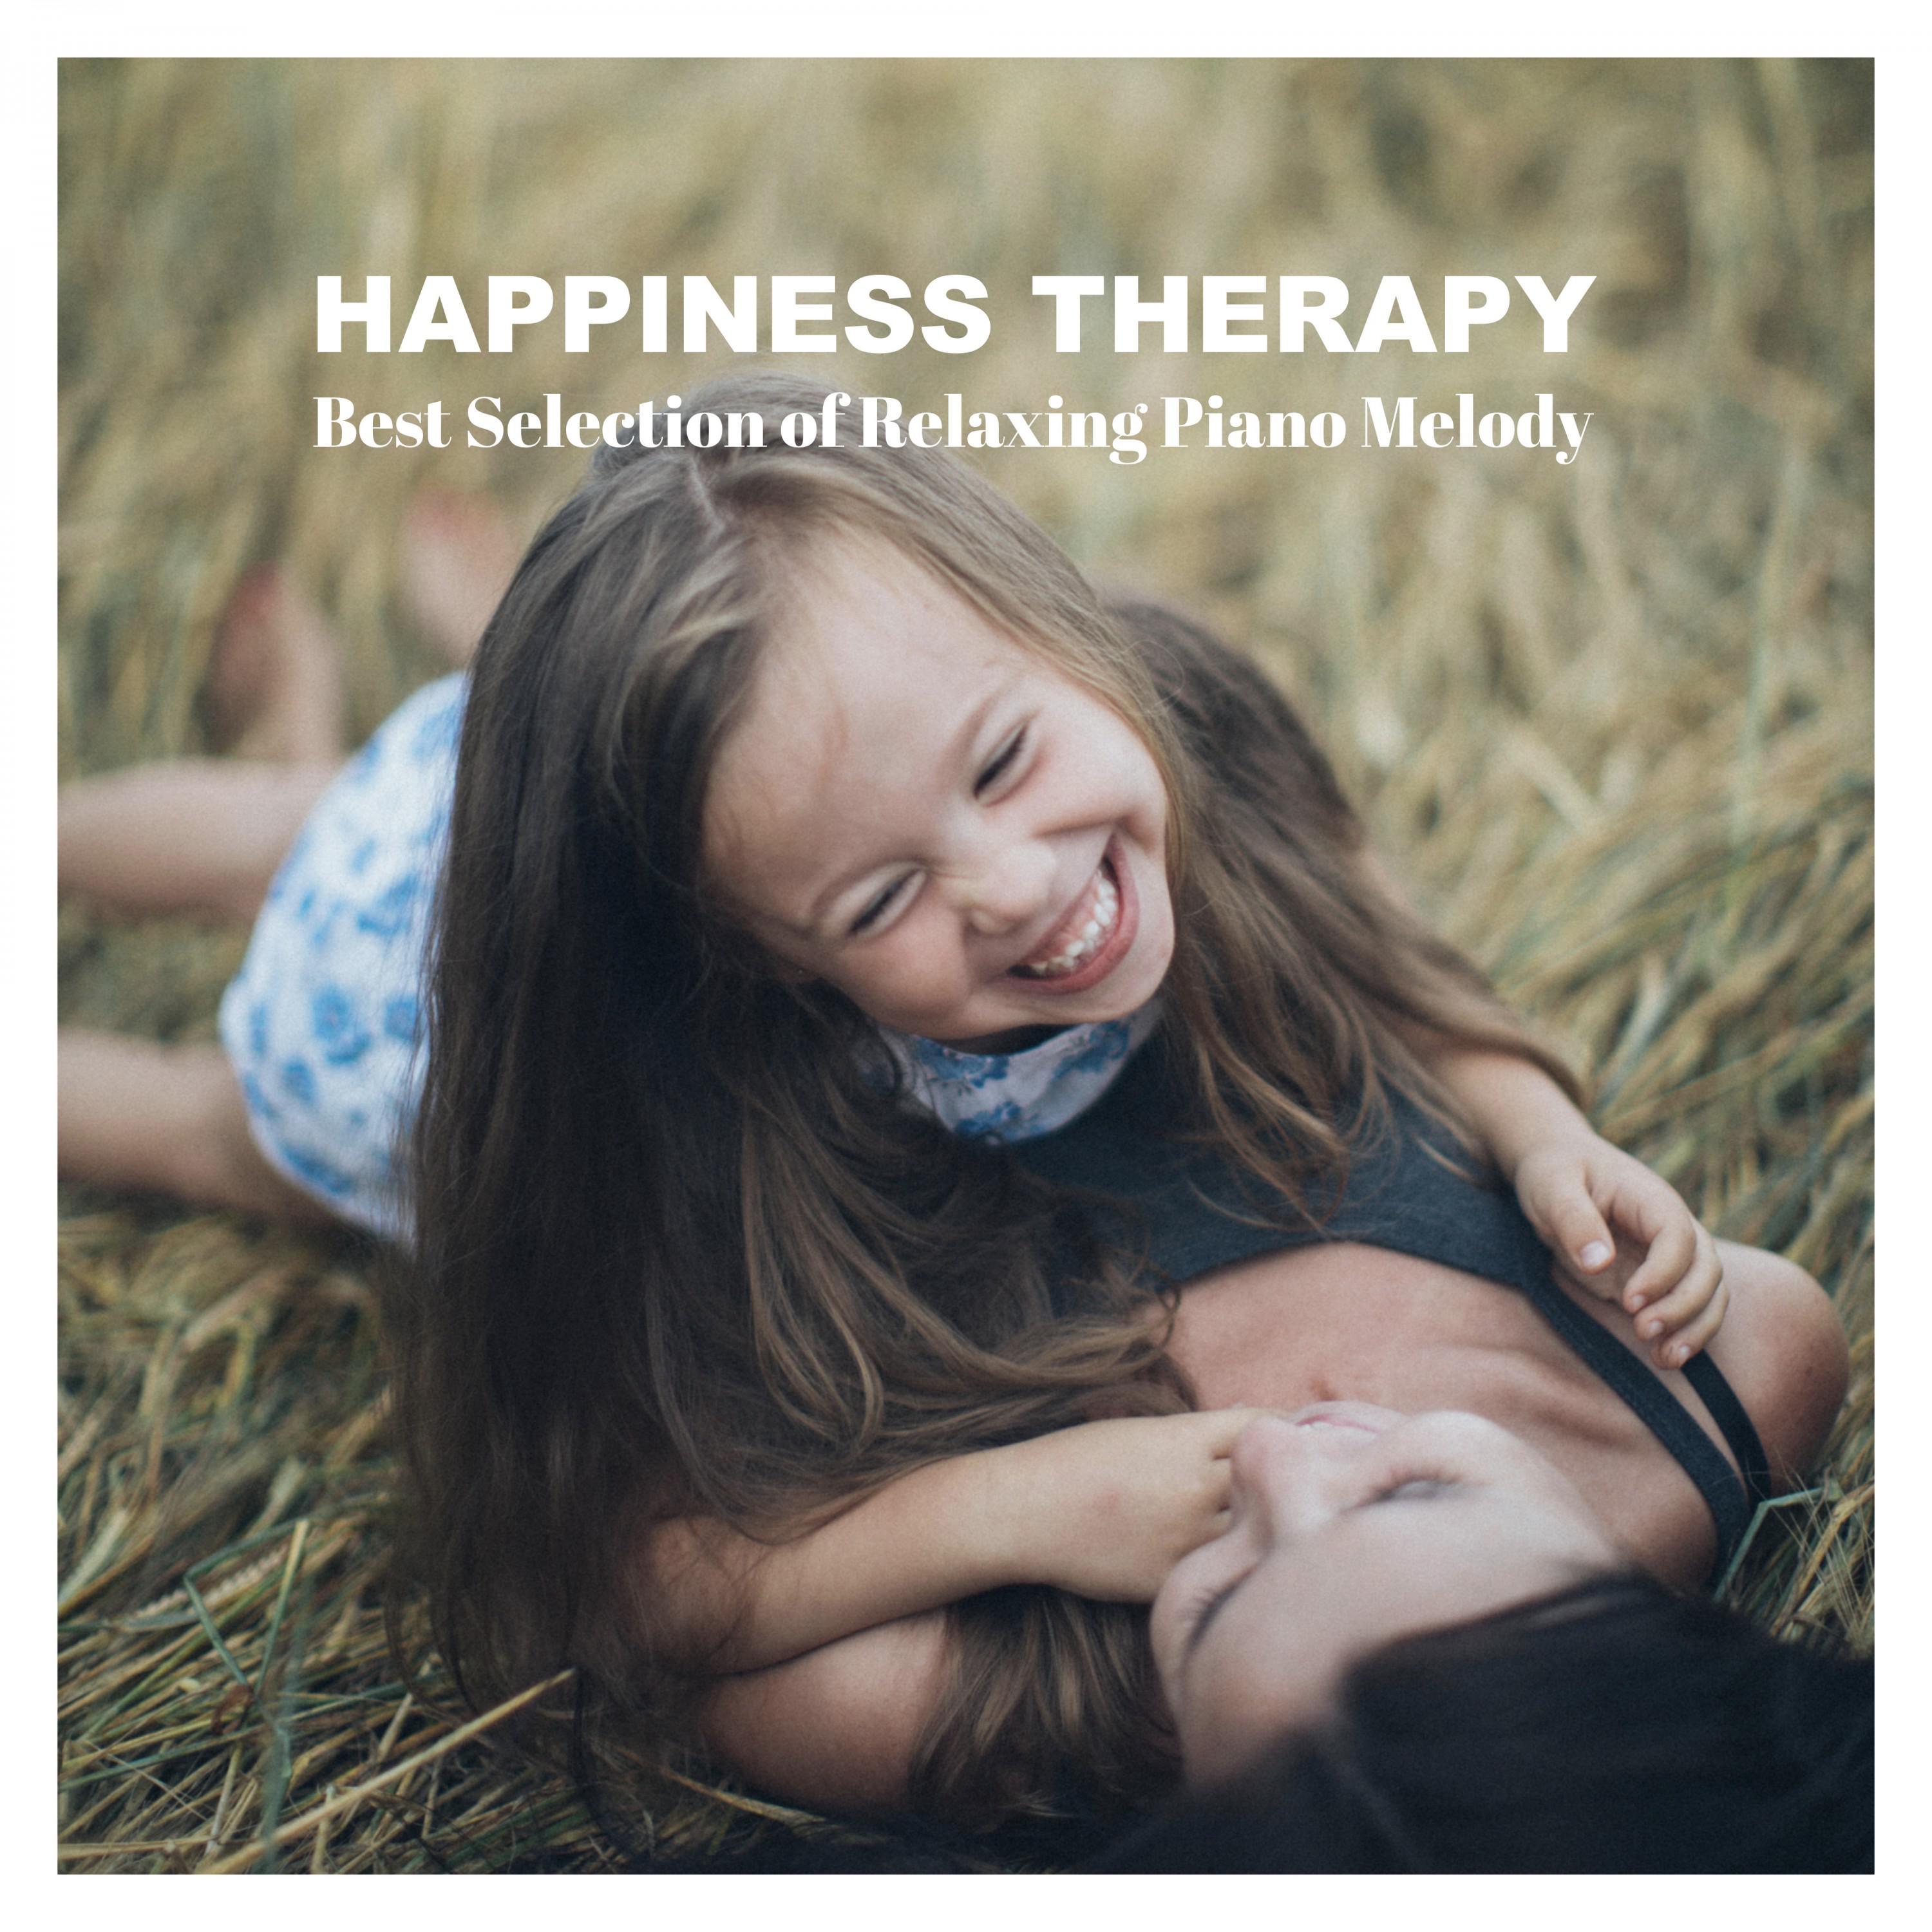 Happiness Therapy: Best Selection of Relaxing Piano Melody